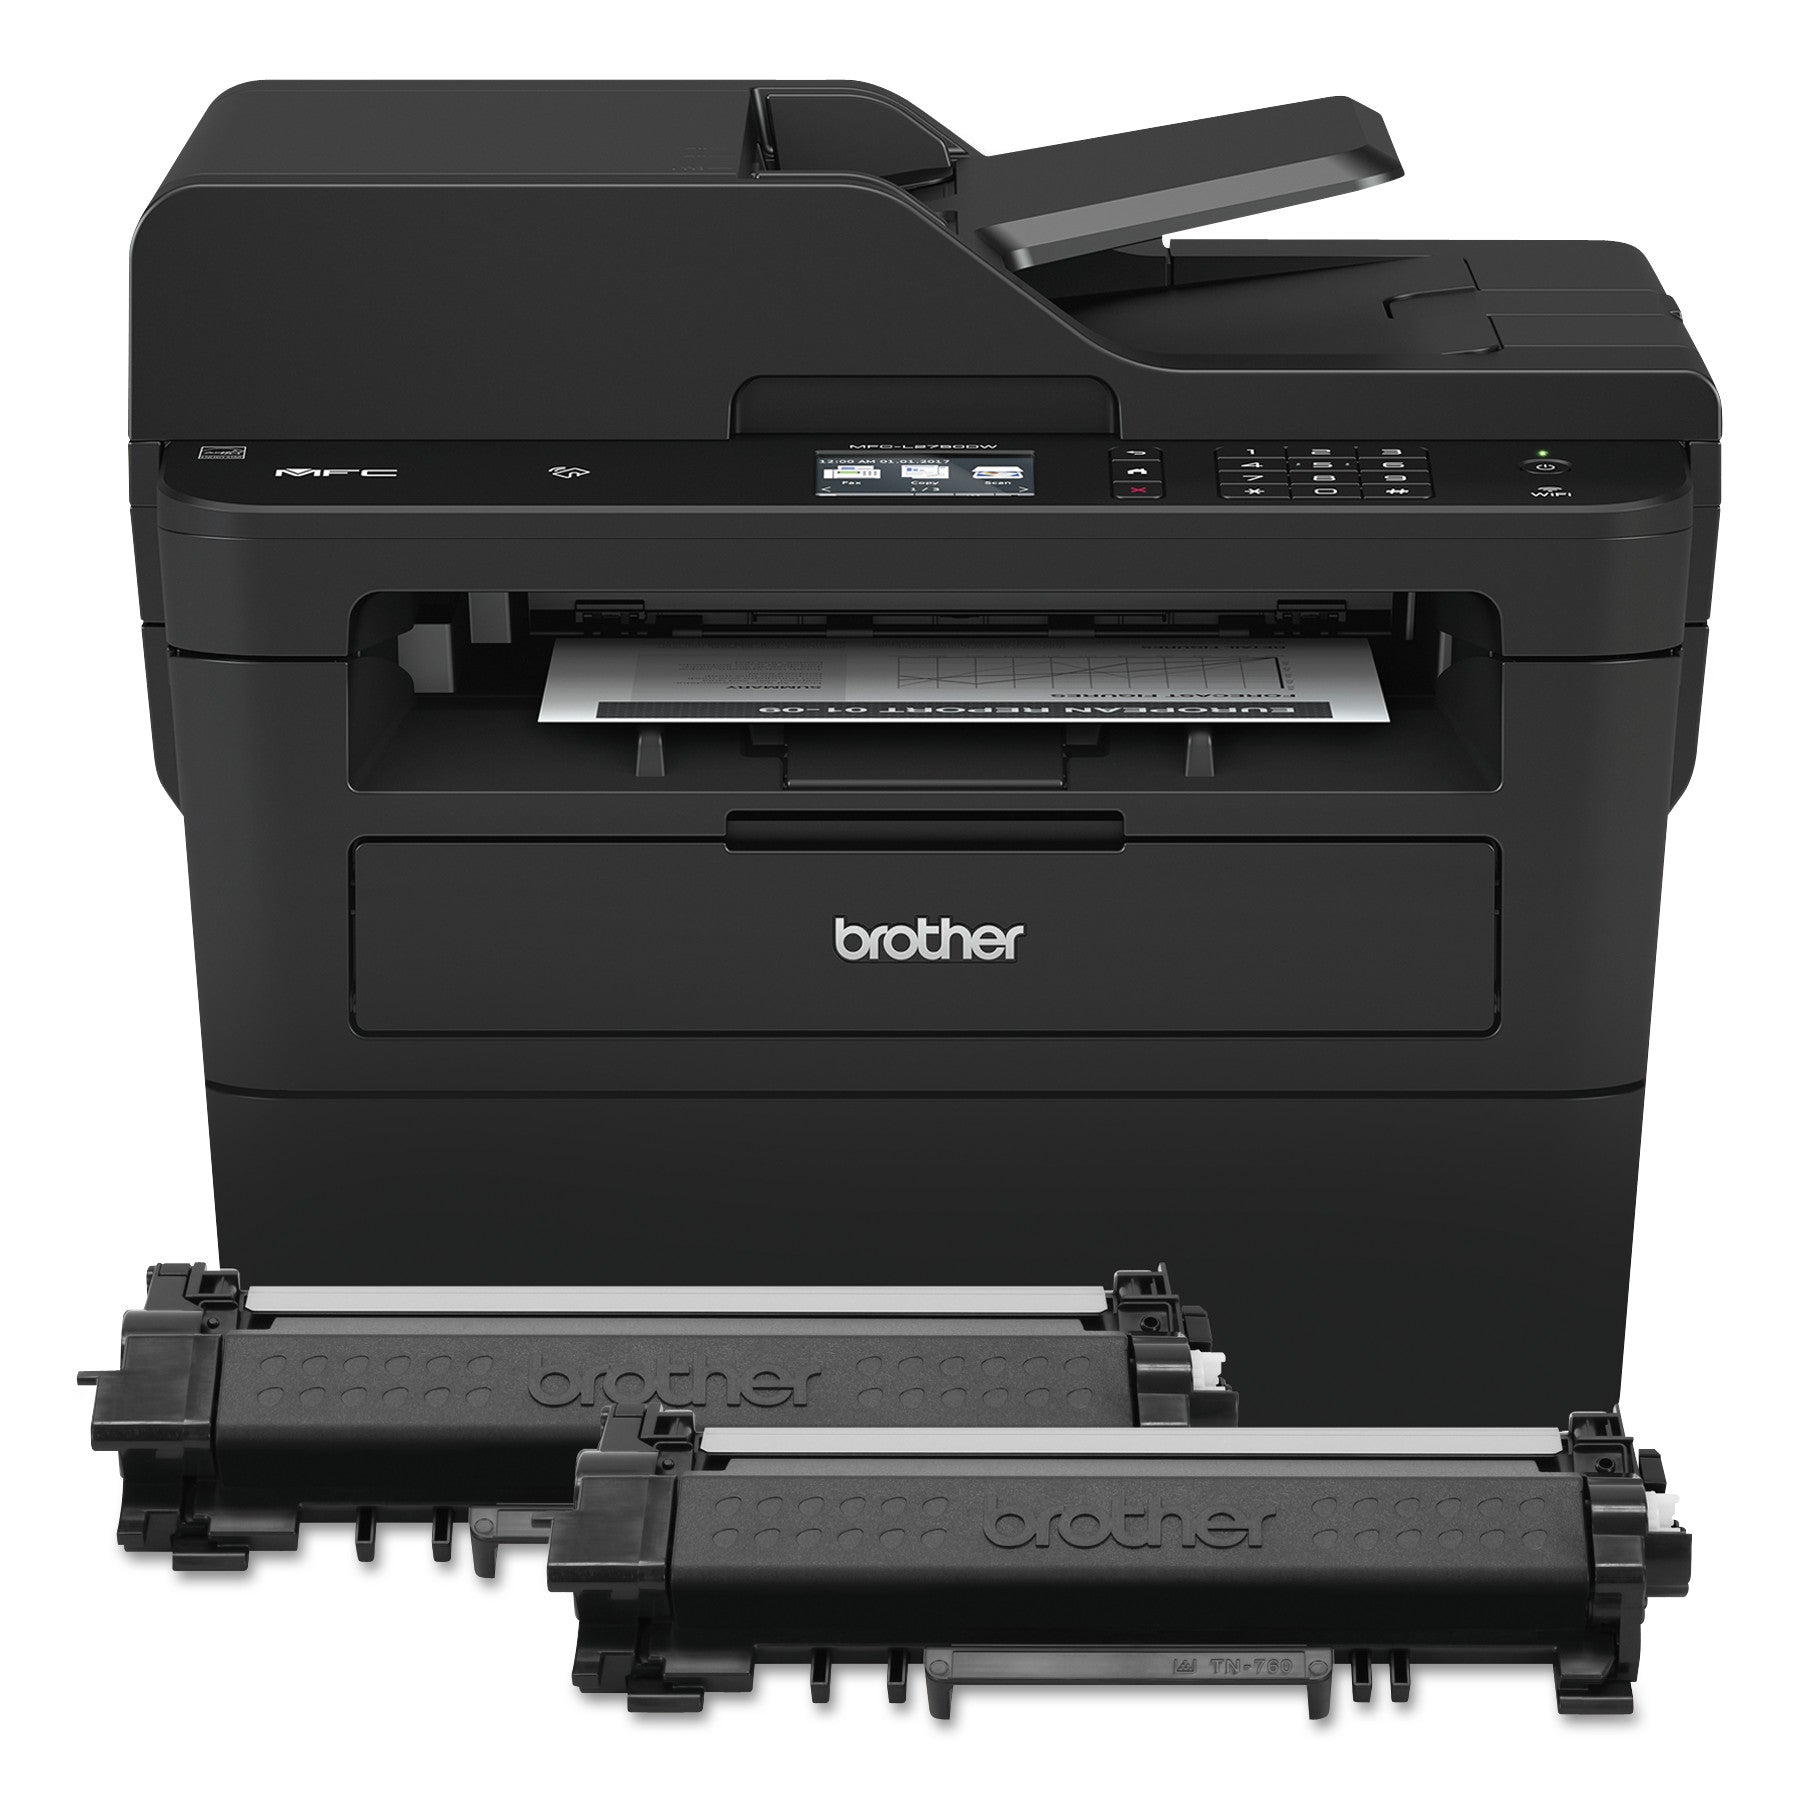 mfcl2750dwxl-xl-extended-print-compact-laser-all-in-one-printer-with-up-to-2-years-of-toner-in-box_brtmfcl2750dwxl - 1